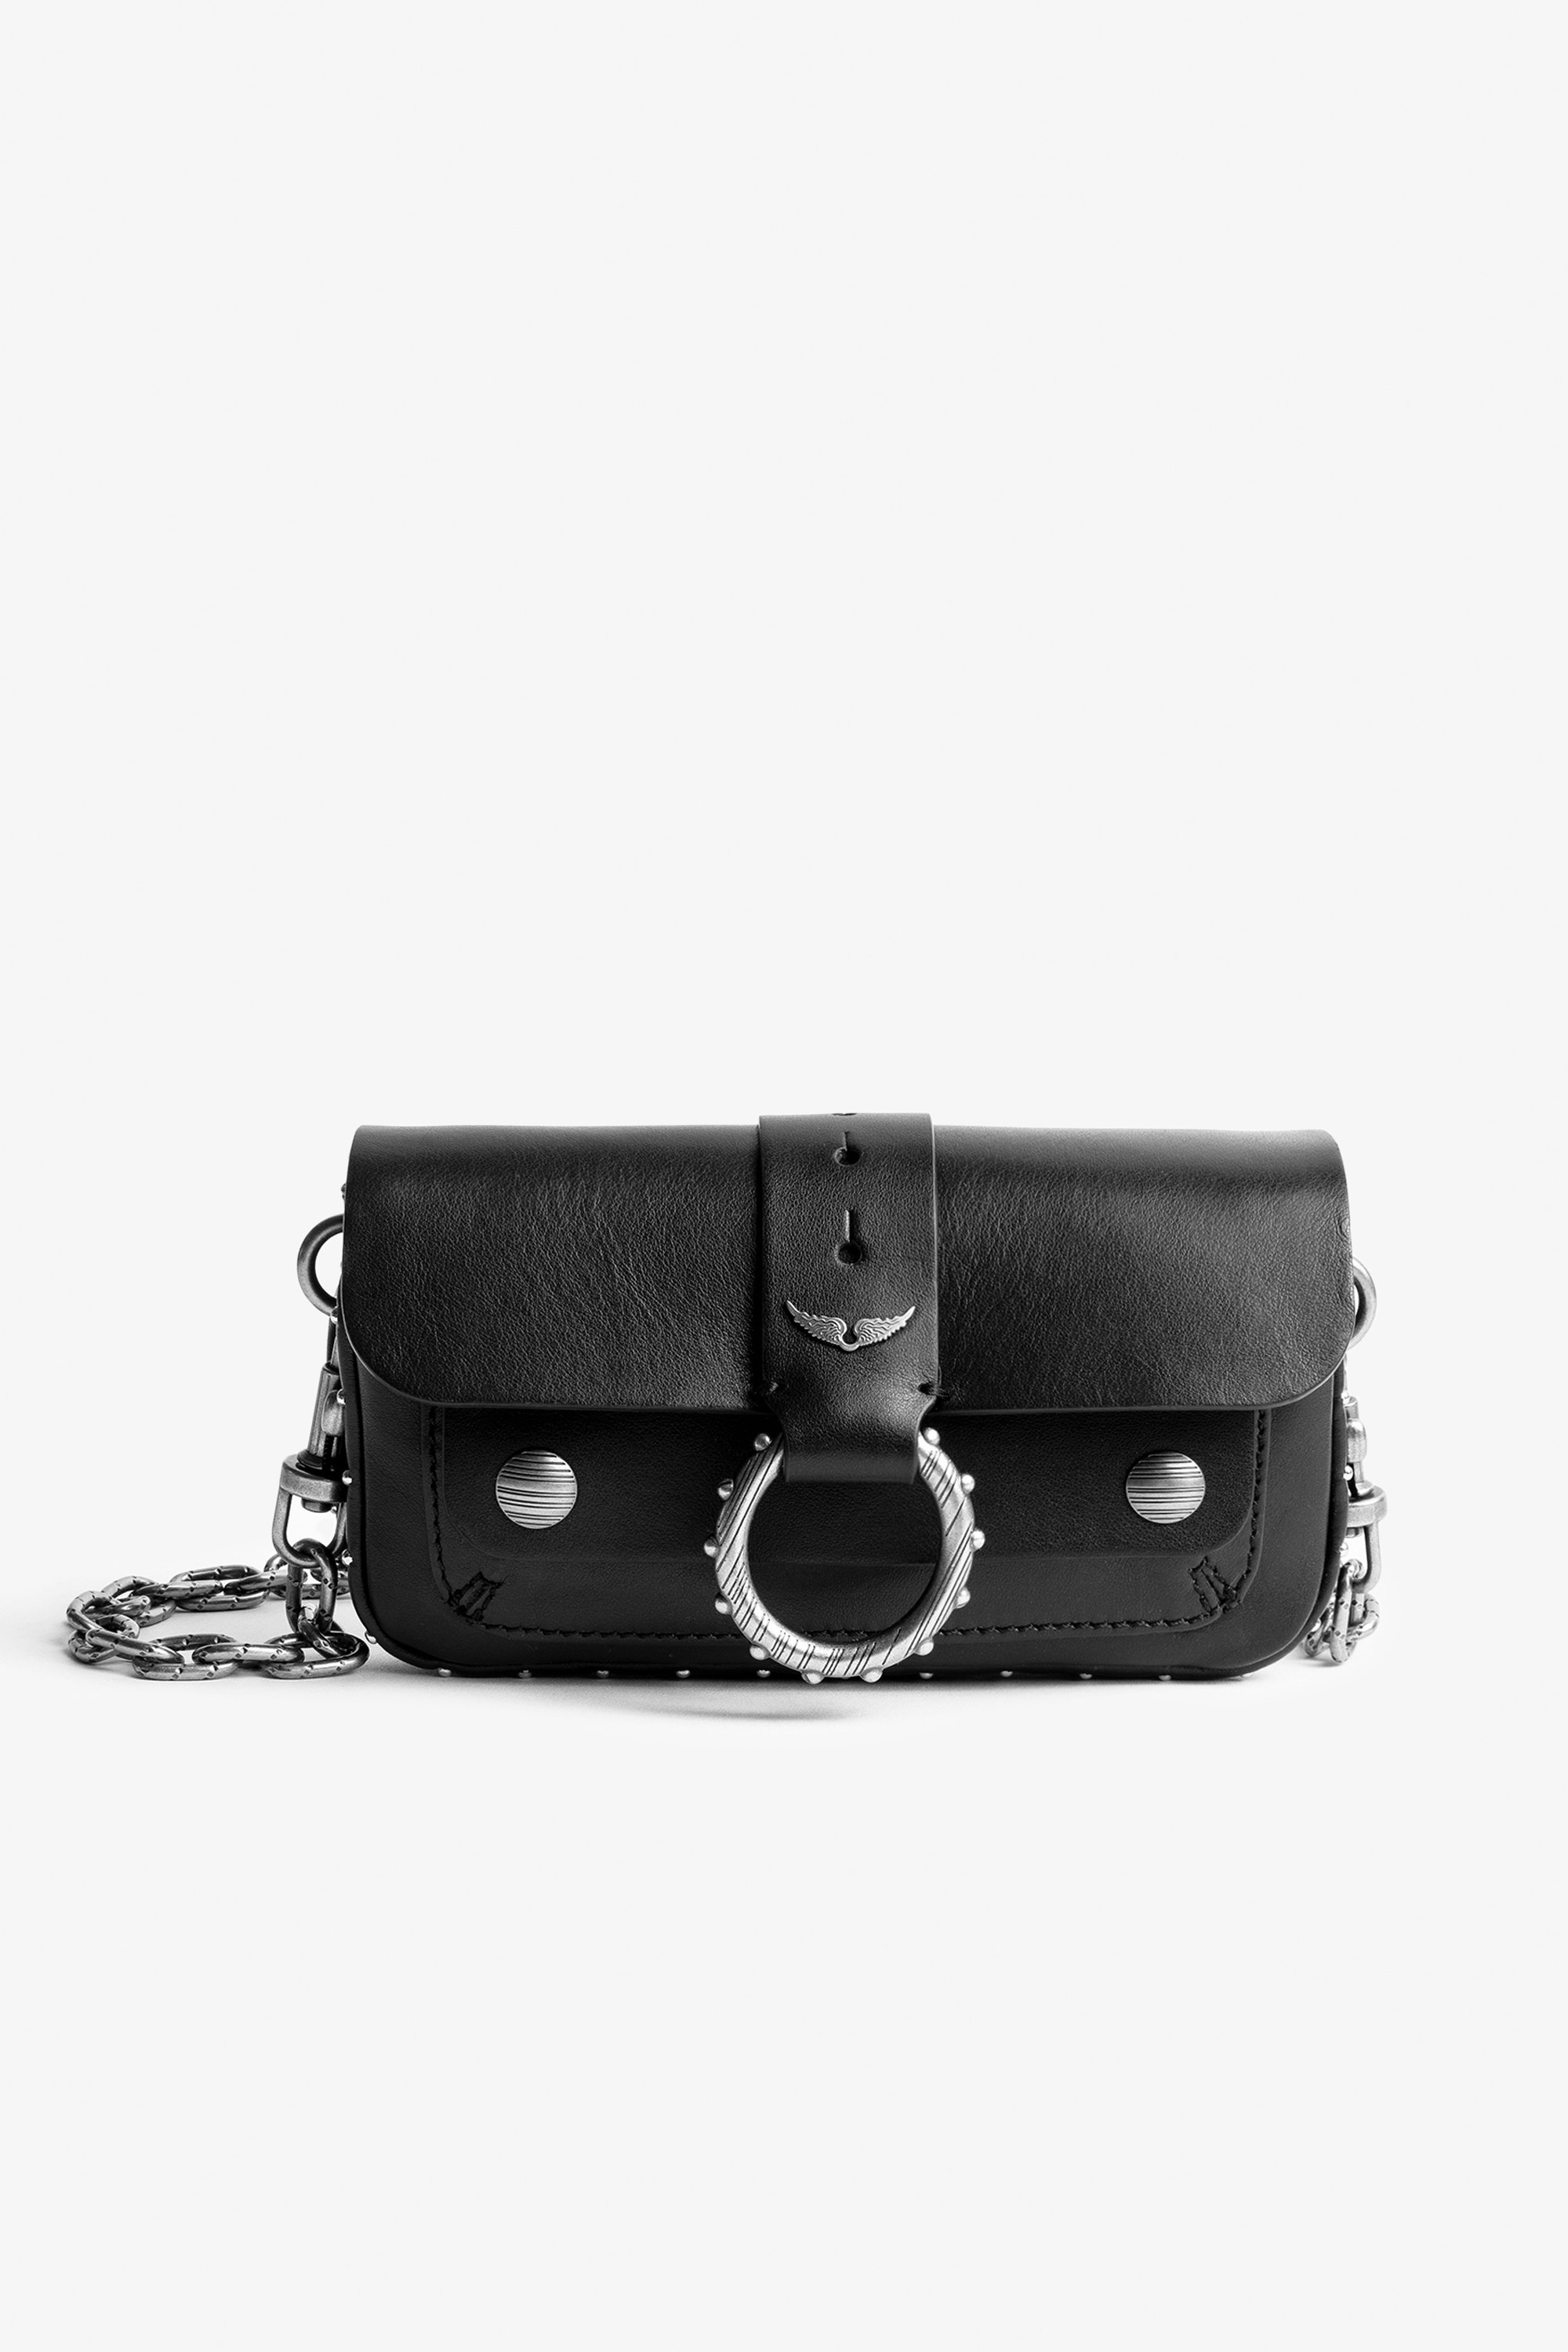 Kate Wallet バッグ Kate Wallet iconic women’s smooth black leather bag.